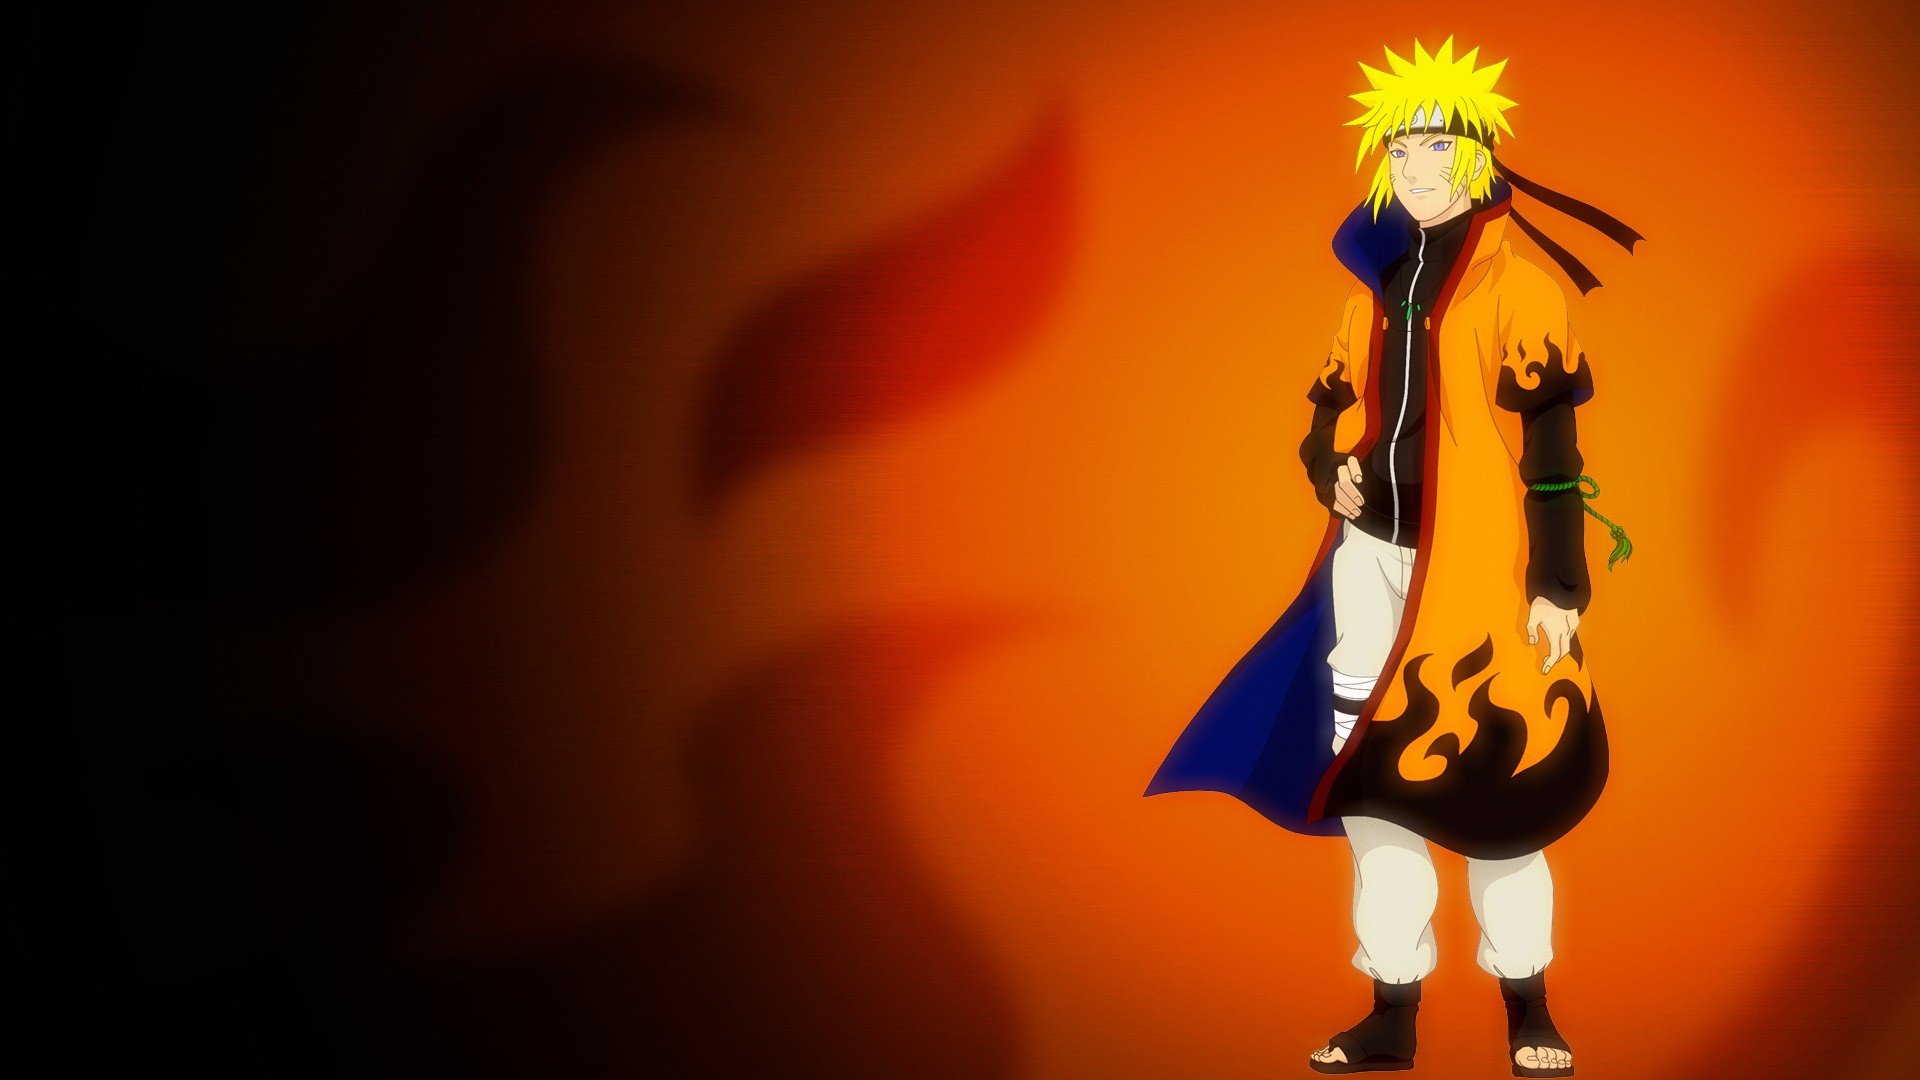 1920x1080 Naruto 2014 HD Wide Wallpaper for Widescreen (63 Wallpapers)